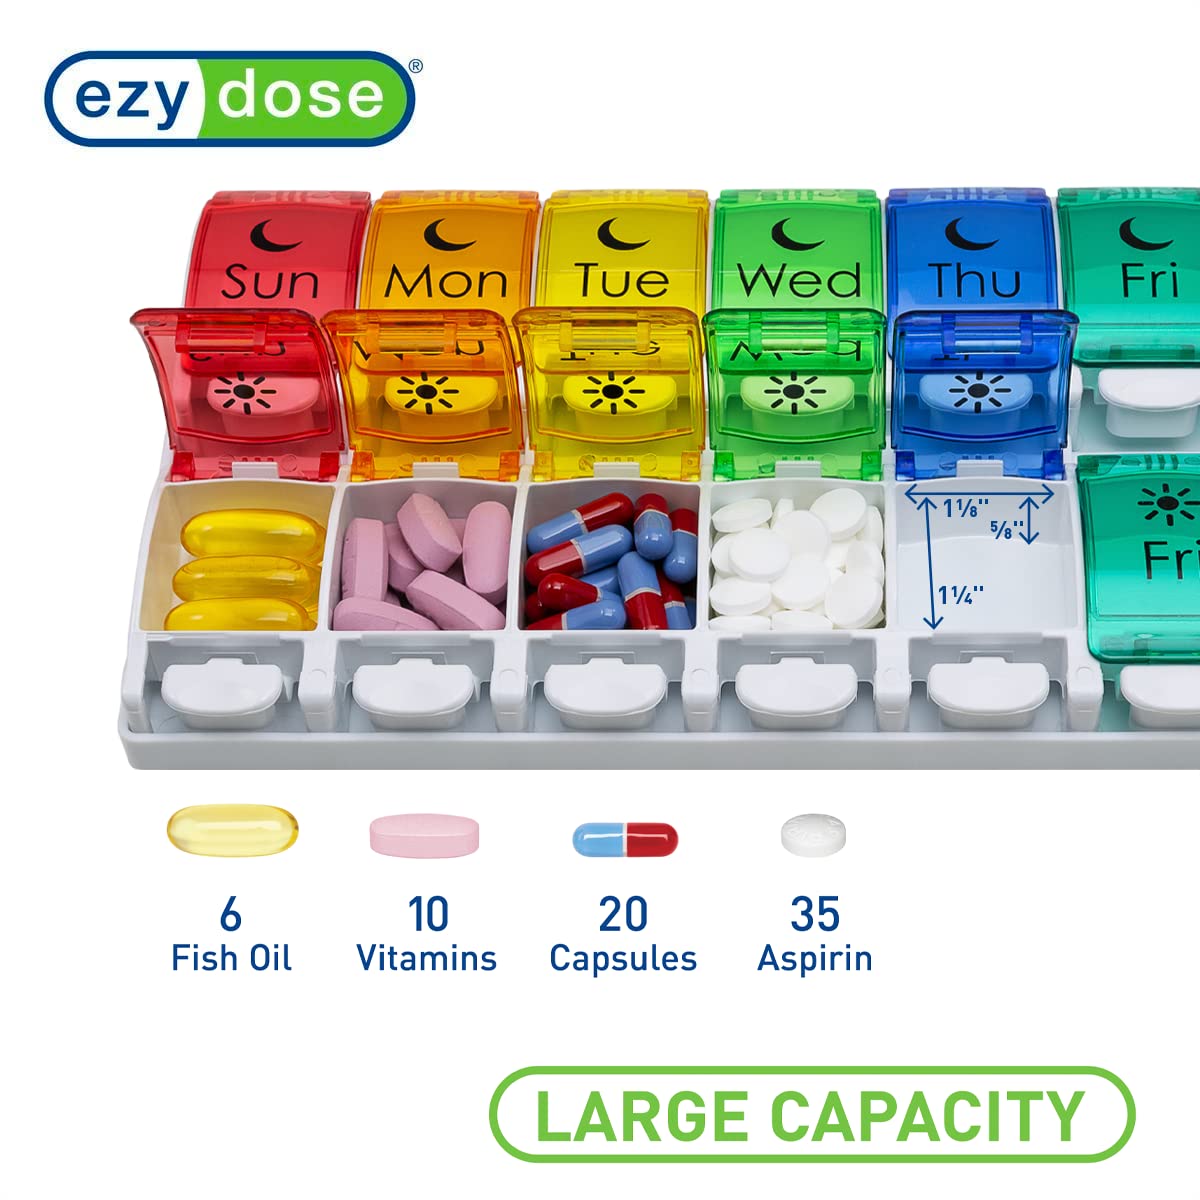 EZY DOSE Push Button (7-Day) Pill Case, Medicine Planner, Vitamin Organizer, 2 Times a Day AM/PM, Removeabale Trays, Large Compartments, Arthritis Friendly, Rainbow Lids